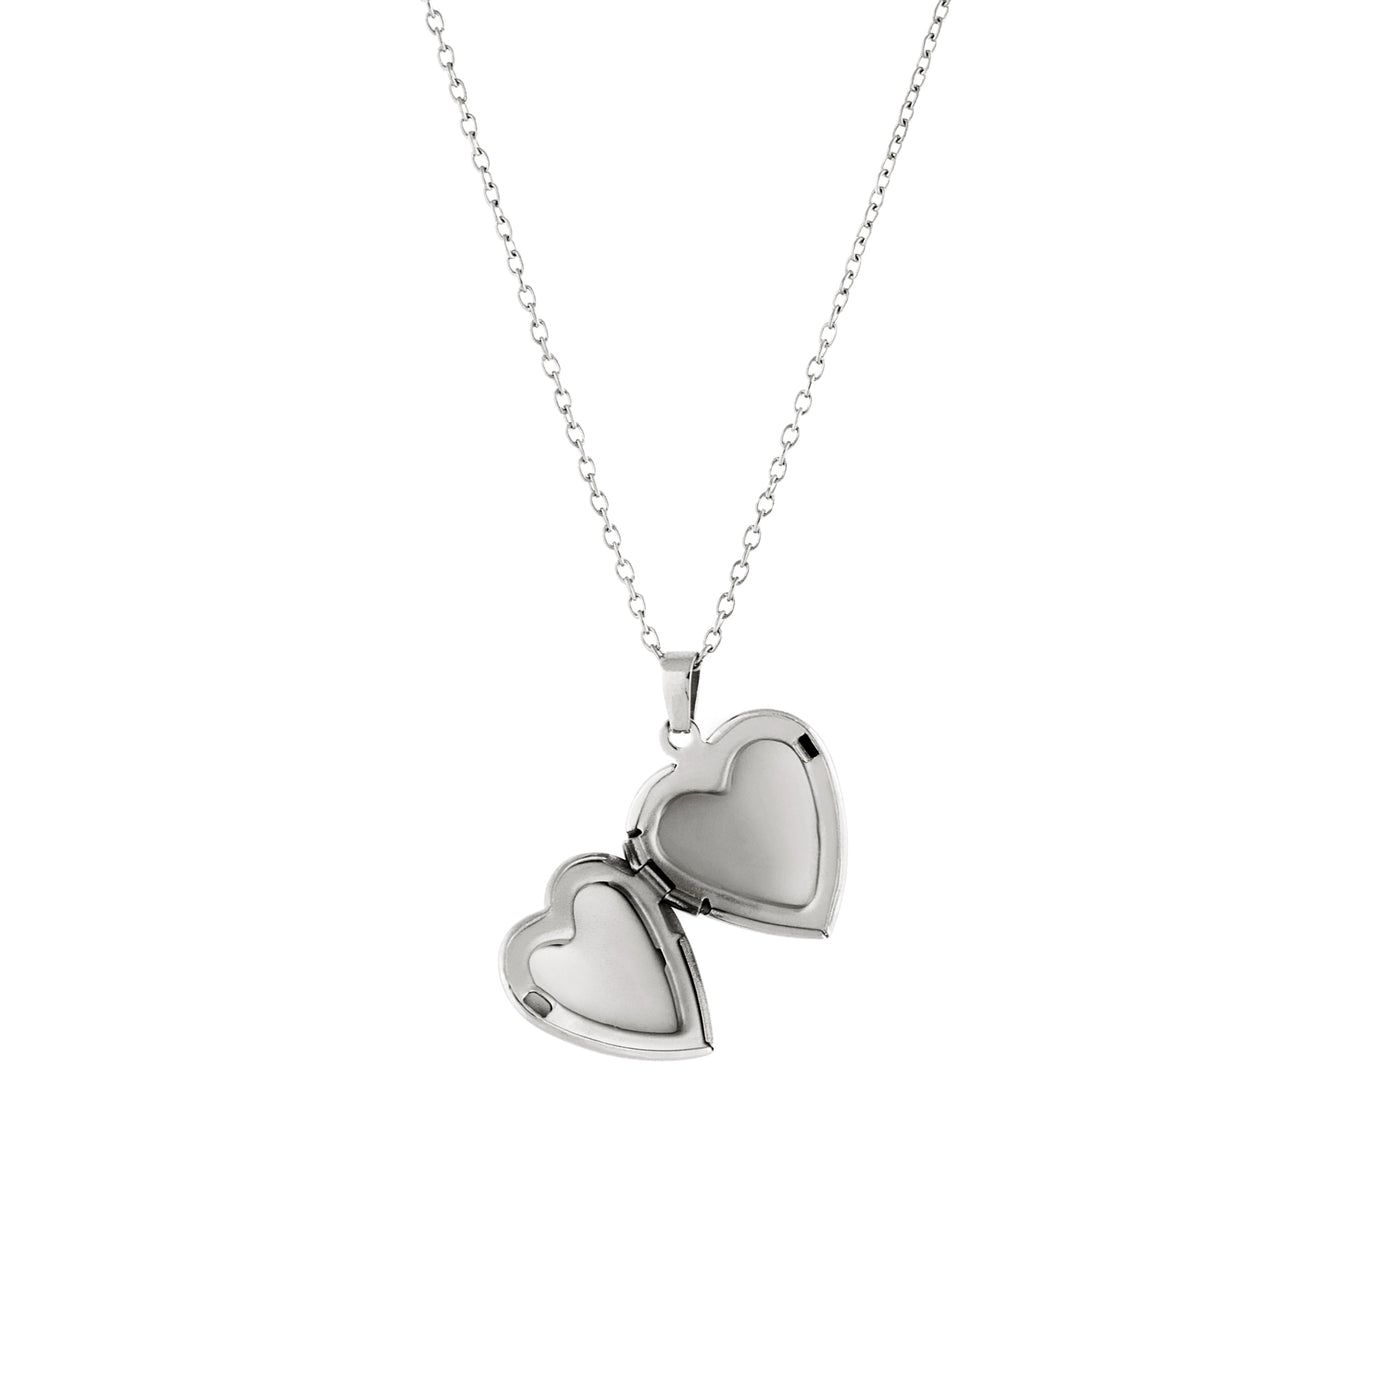 Daydream Necklace - Silver